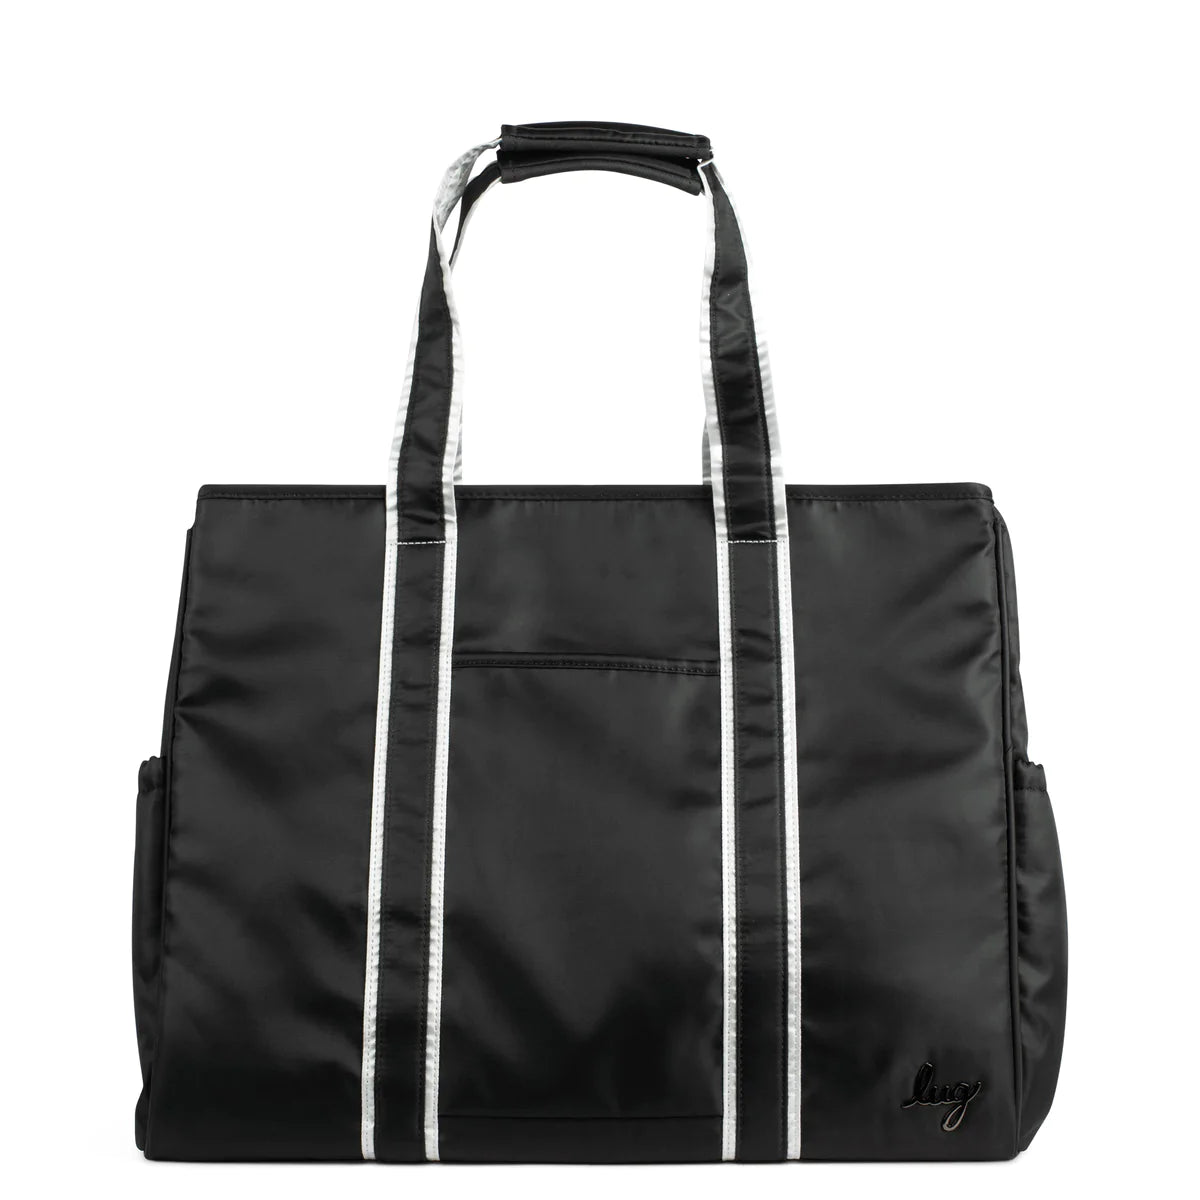 LUG Rover X-Large Carry-All Tote in Contemporary Black